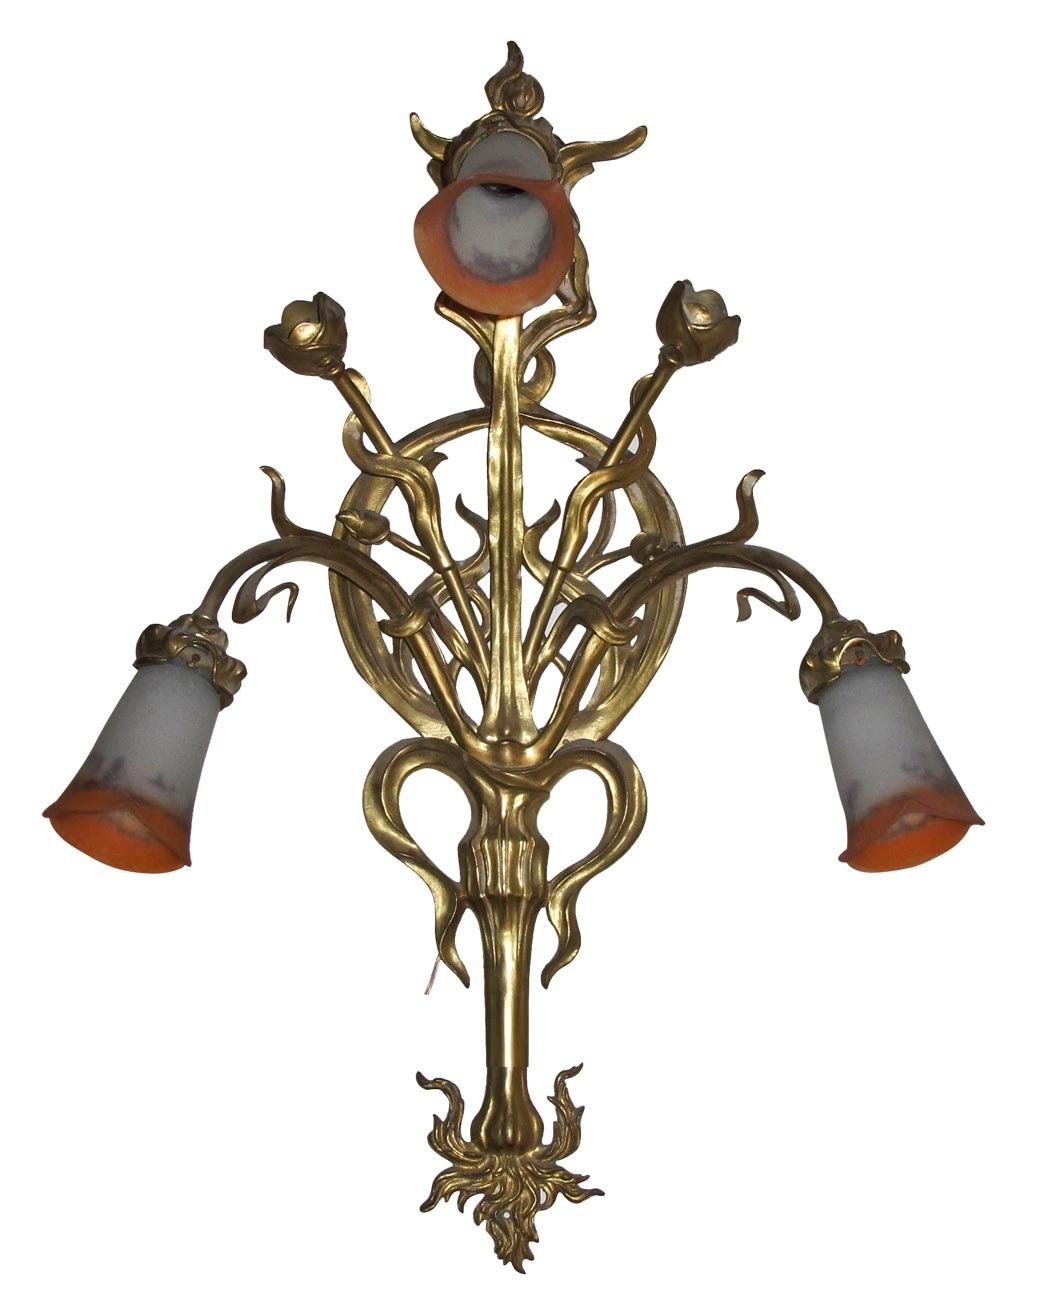 2 Amaizing sconces

France 
Design: Louis Majorelle
Jugendstil, Art Nouveau, Liberty
To take care of your property and the lives of our customers, the new wiring has been done.
We have specialized in the sale of Art Deco and Art Nouveau and Vintage